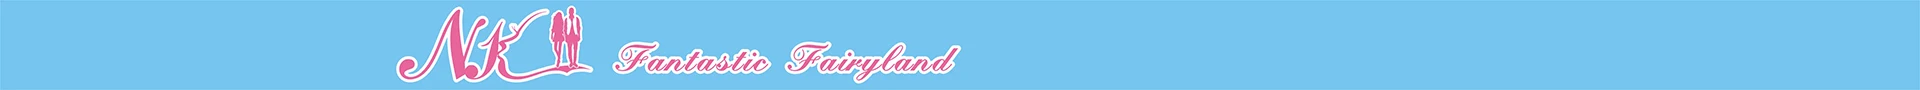 store-banner